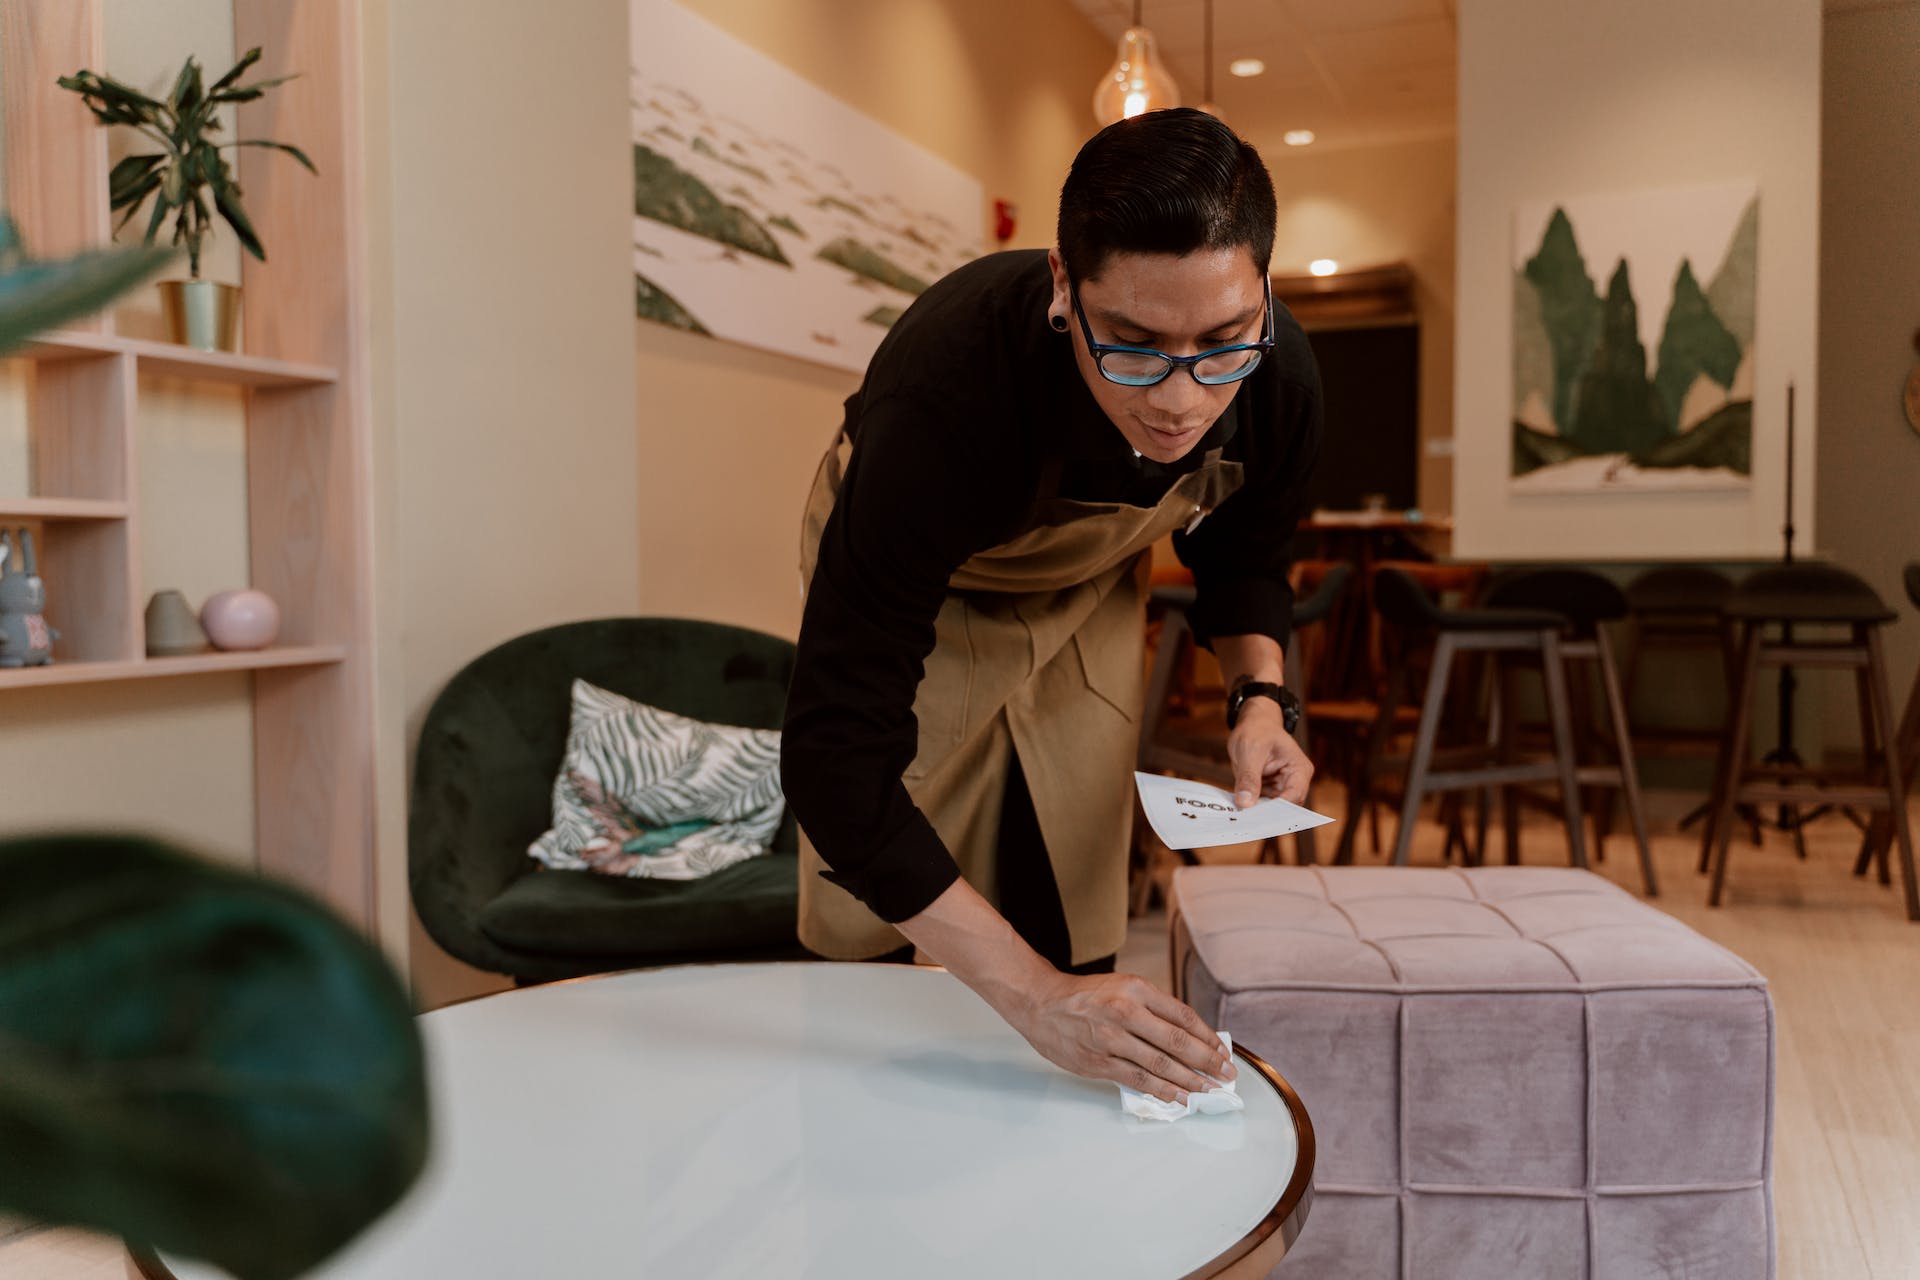 A server wiping a table | Source: Pexels